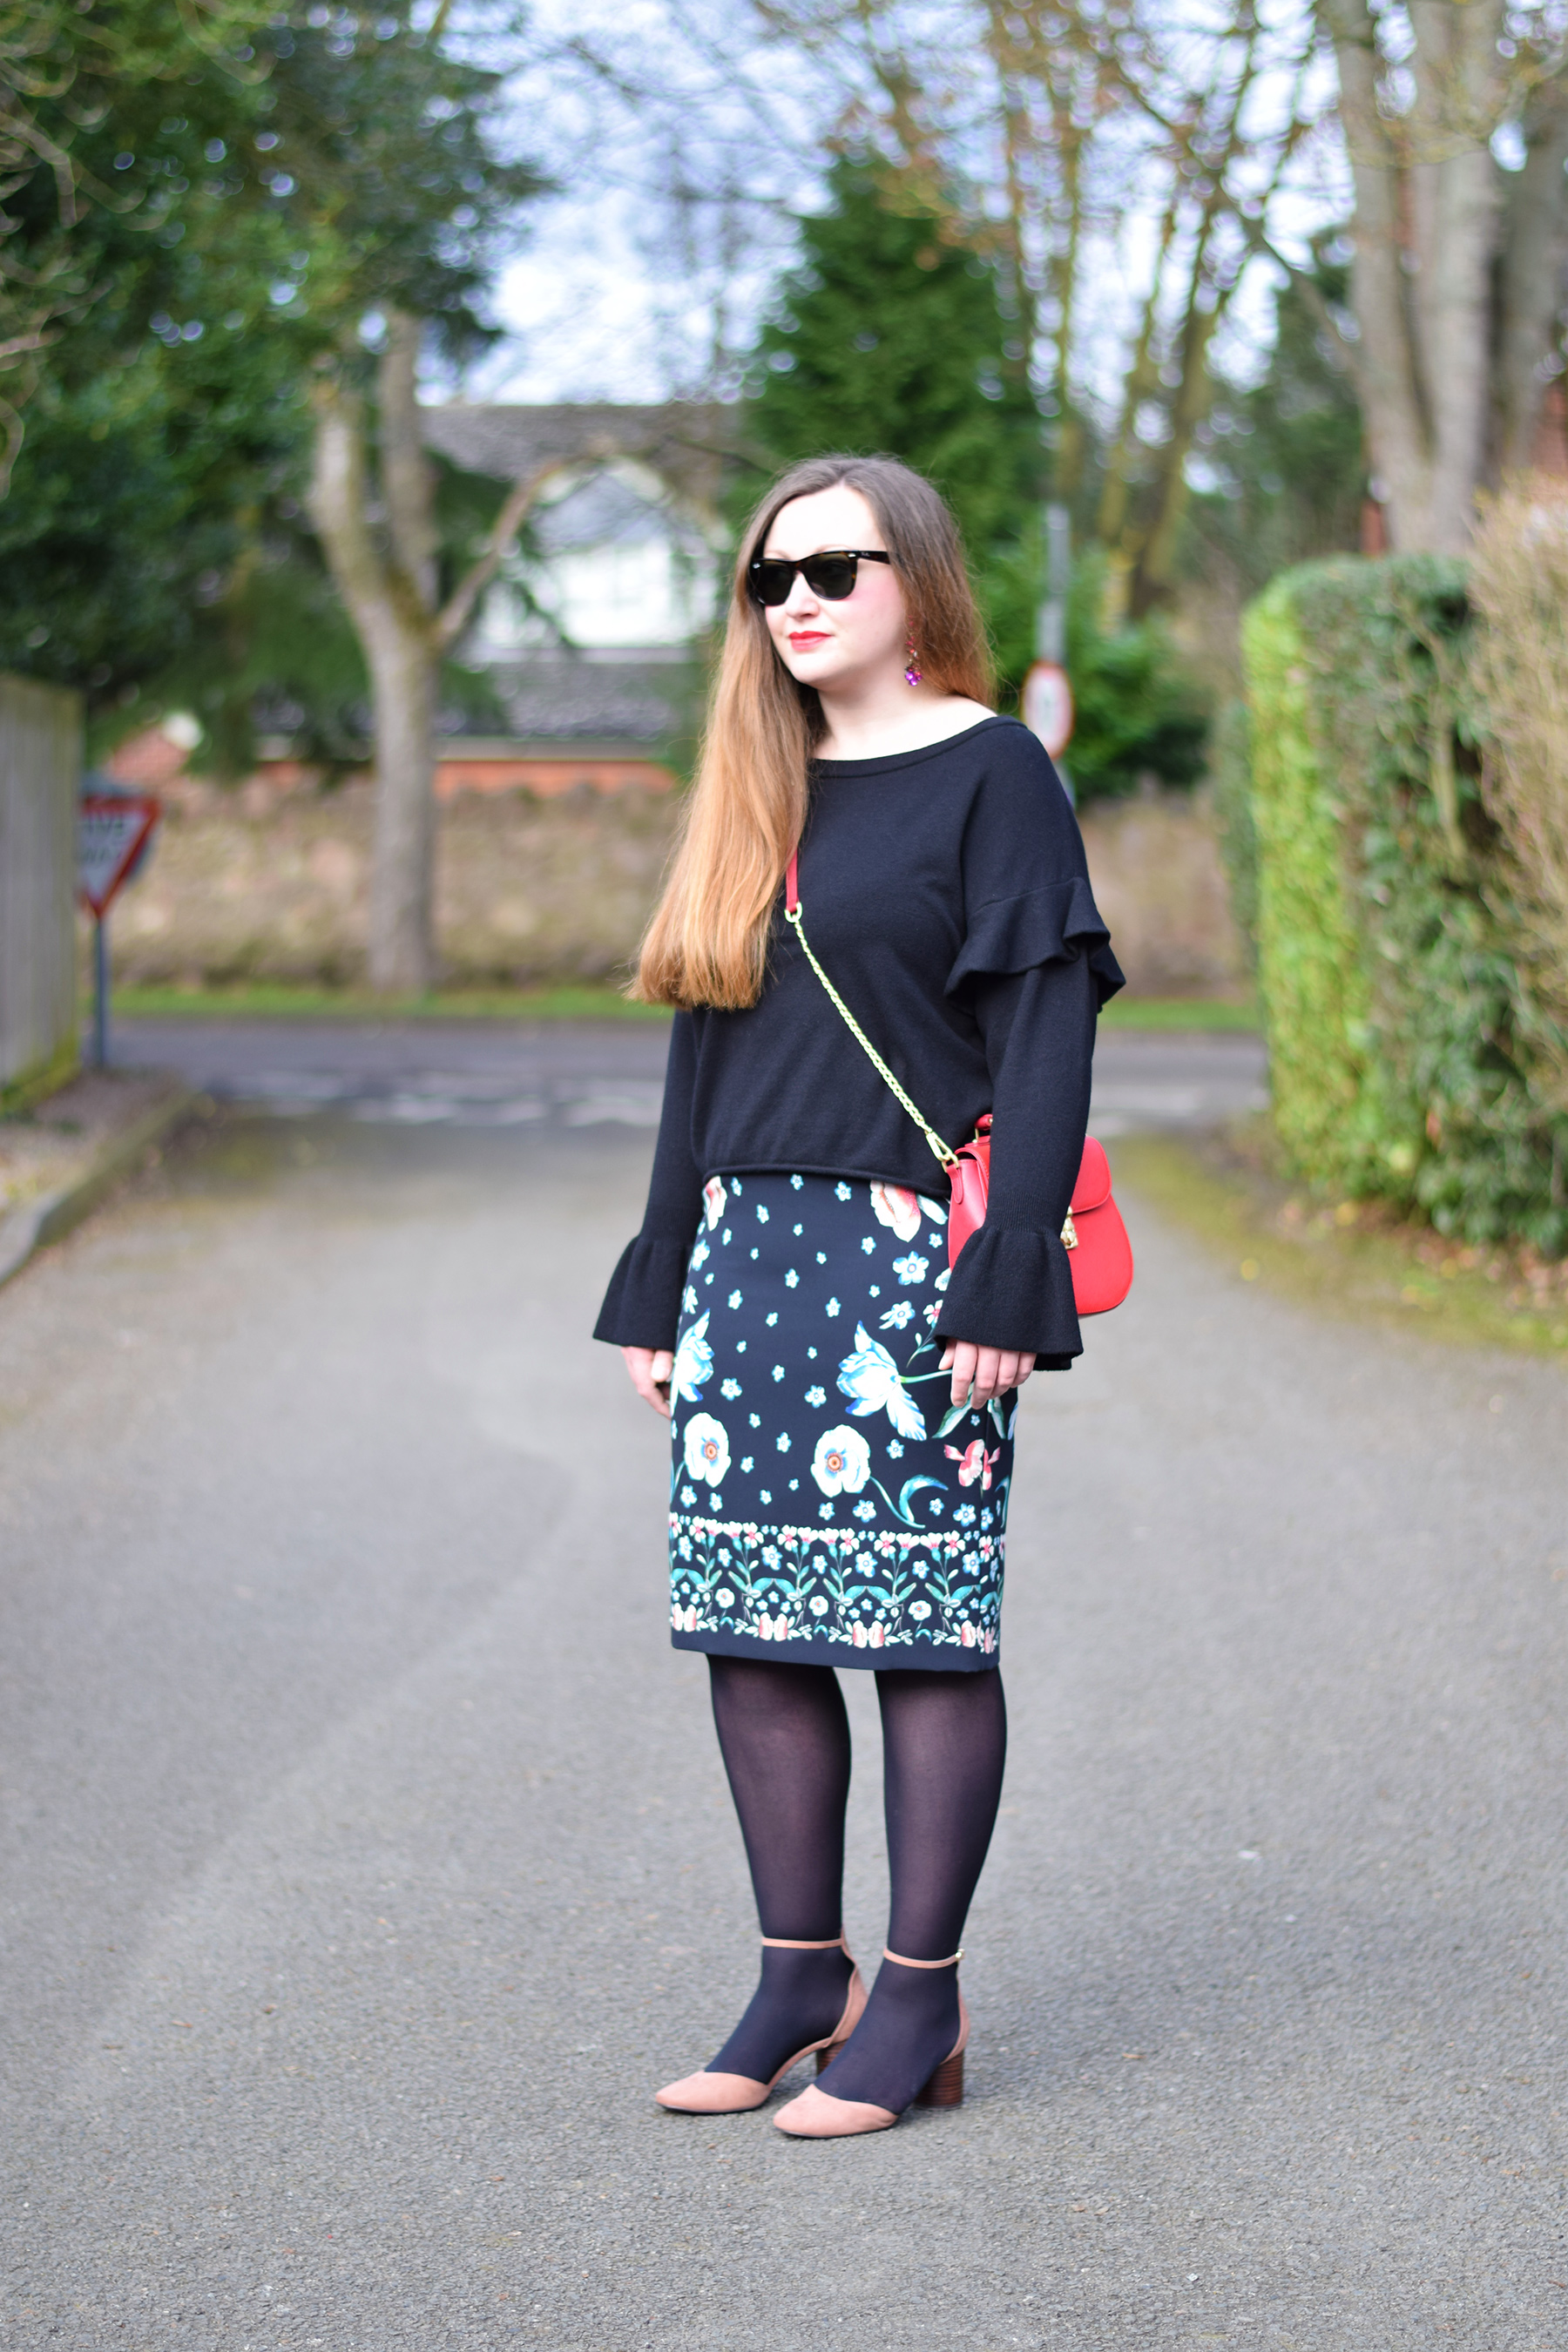 Floral Pencil Skirt with black tights